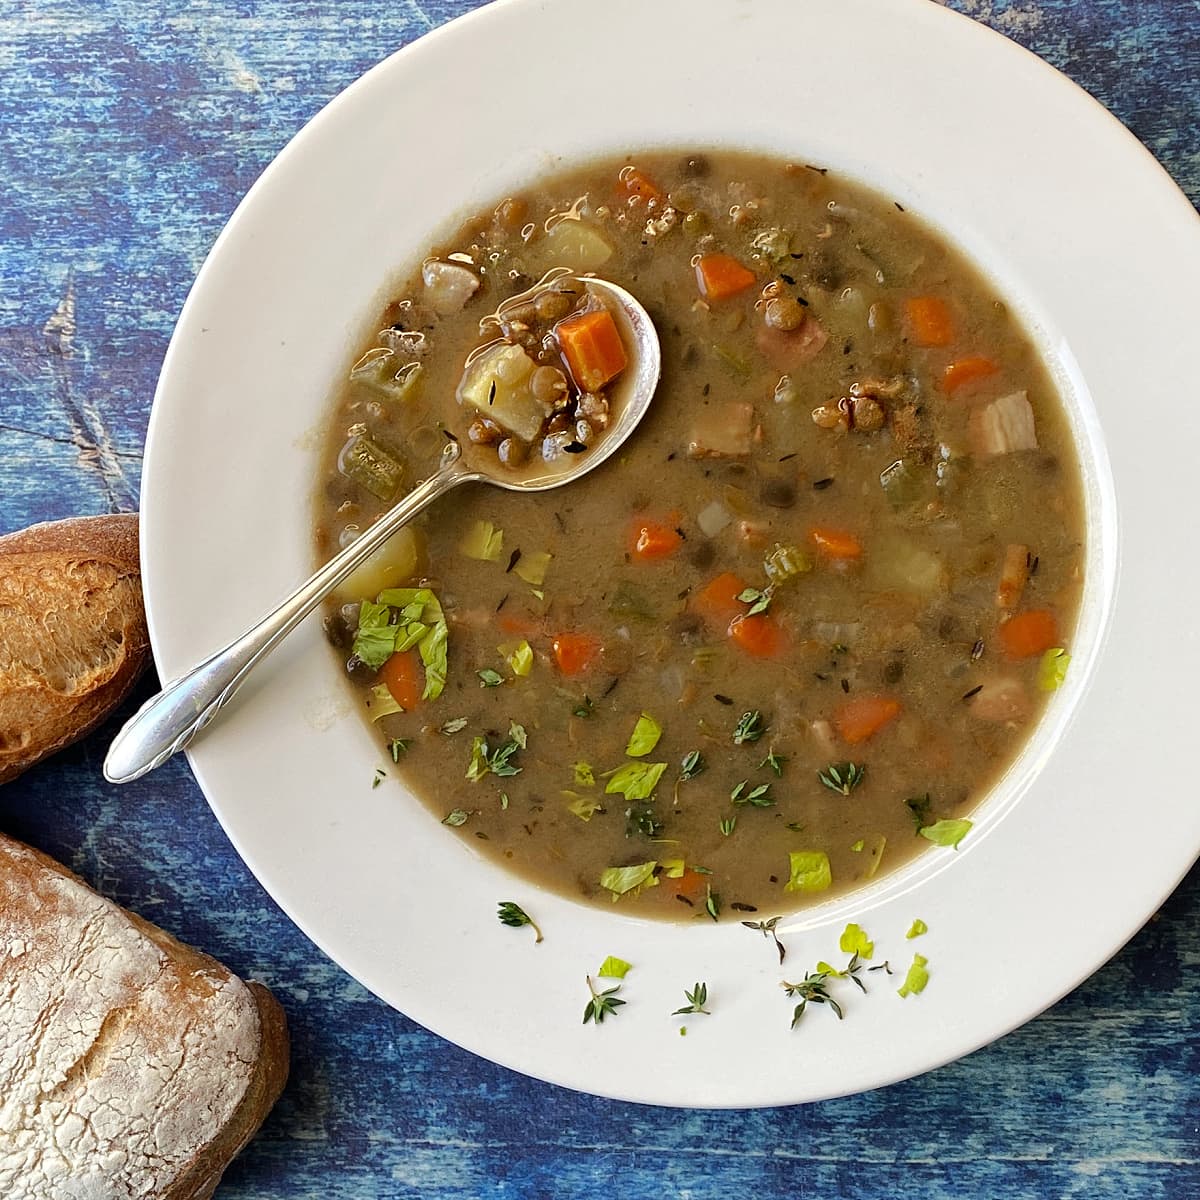 Overhead shot of a wide brimmed bowl filled with lentil soup, garnished with fresh thyme and celery leaves. Spoonful of soup. Crusty bread on the side.  